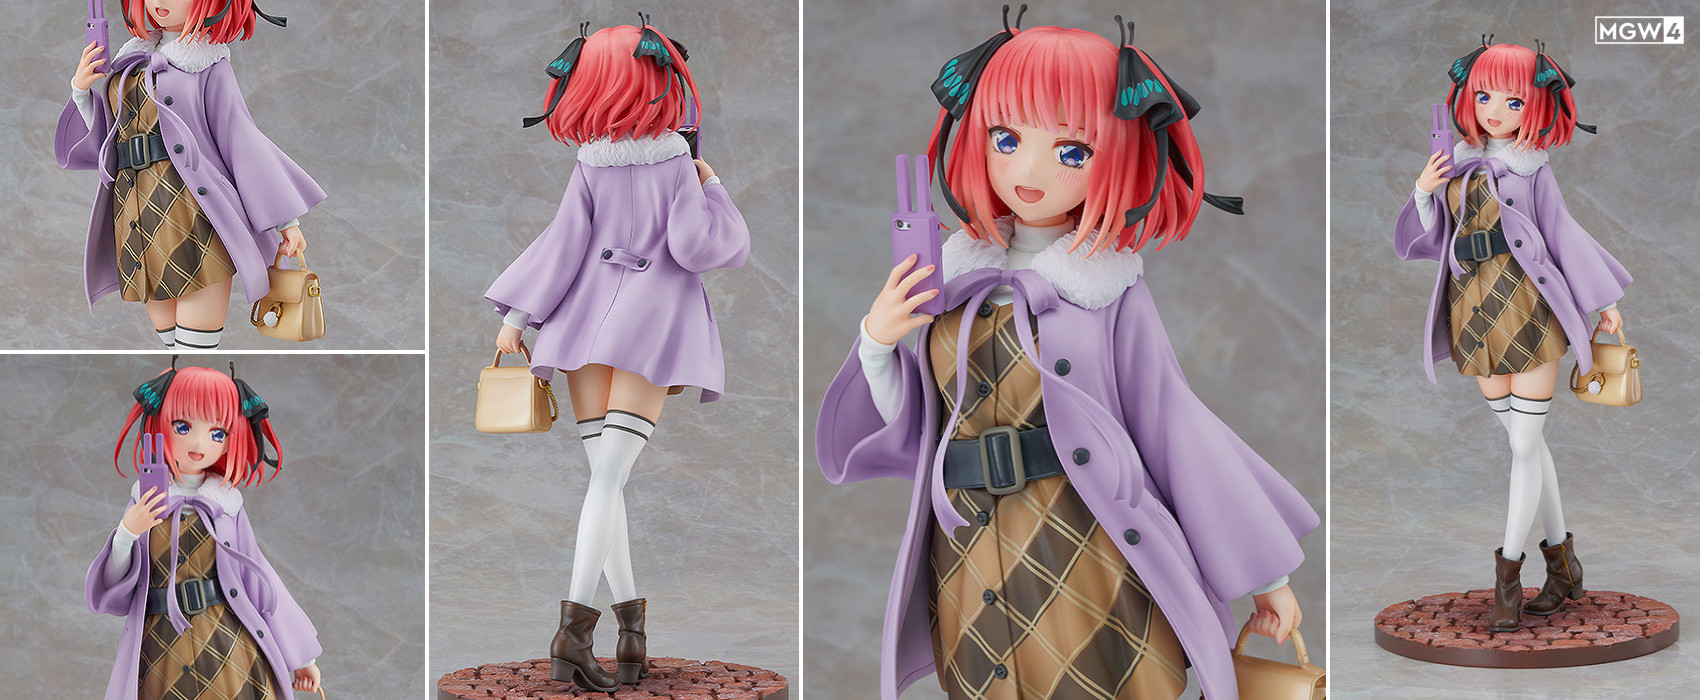 Nakano Nino Date Style Ver. by Good Smile Company from The Quintessential Quintuplets MyGrailWatch Anime Figure Guide